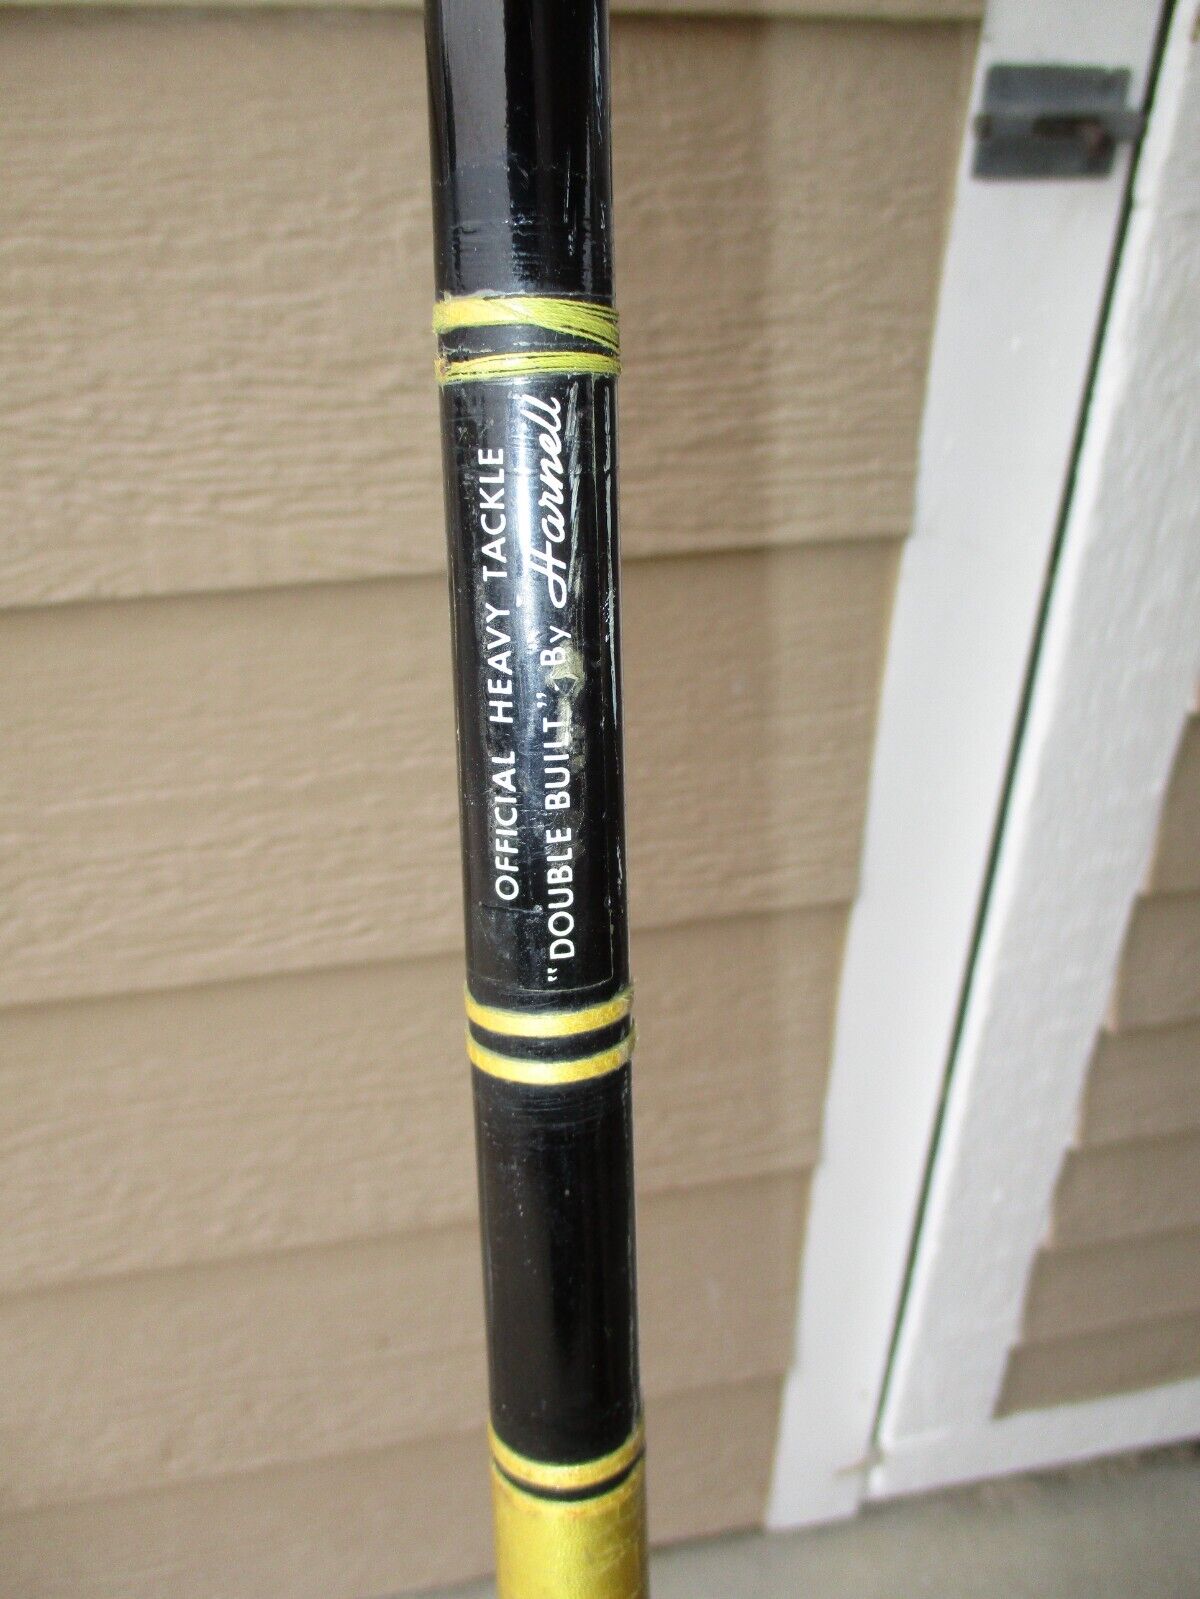 HARNELL 7 FOOT 8 INCH 30 TO 60 POUND CLASS CUSTOM MADE JIG STICK FISHING ROD  - Berinson Tackle Company